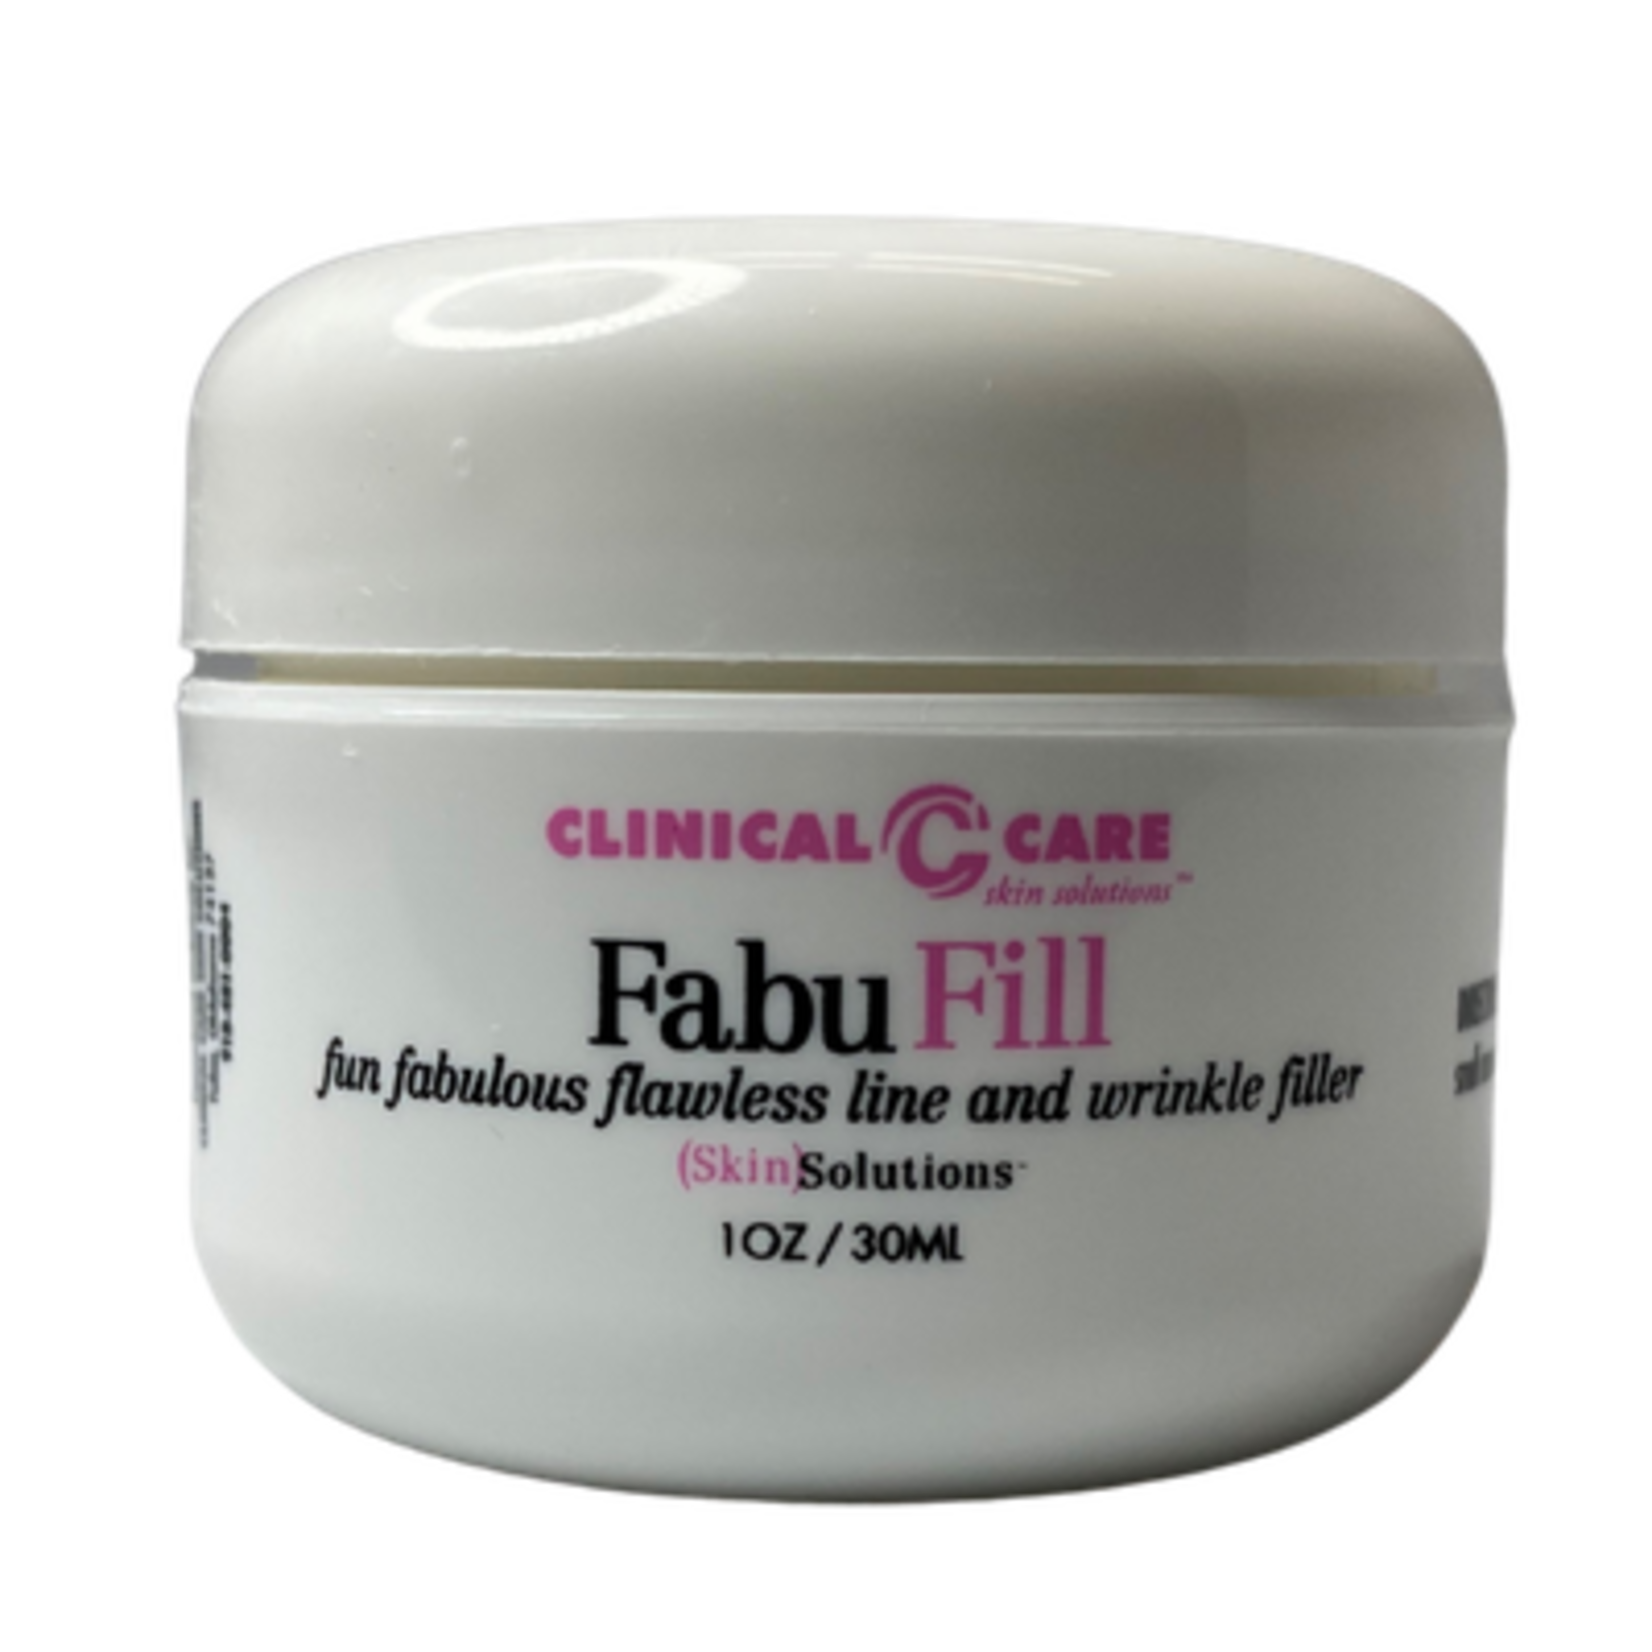 Clinical Care Clinical Care Skin Solutions Fabu Fill Line and Wrinkle Filler 1.2oz